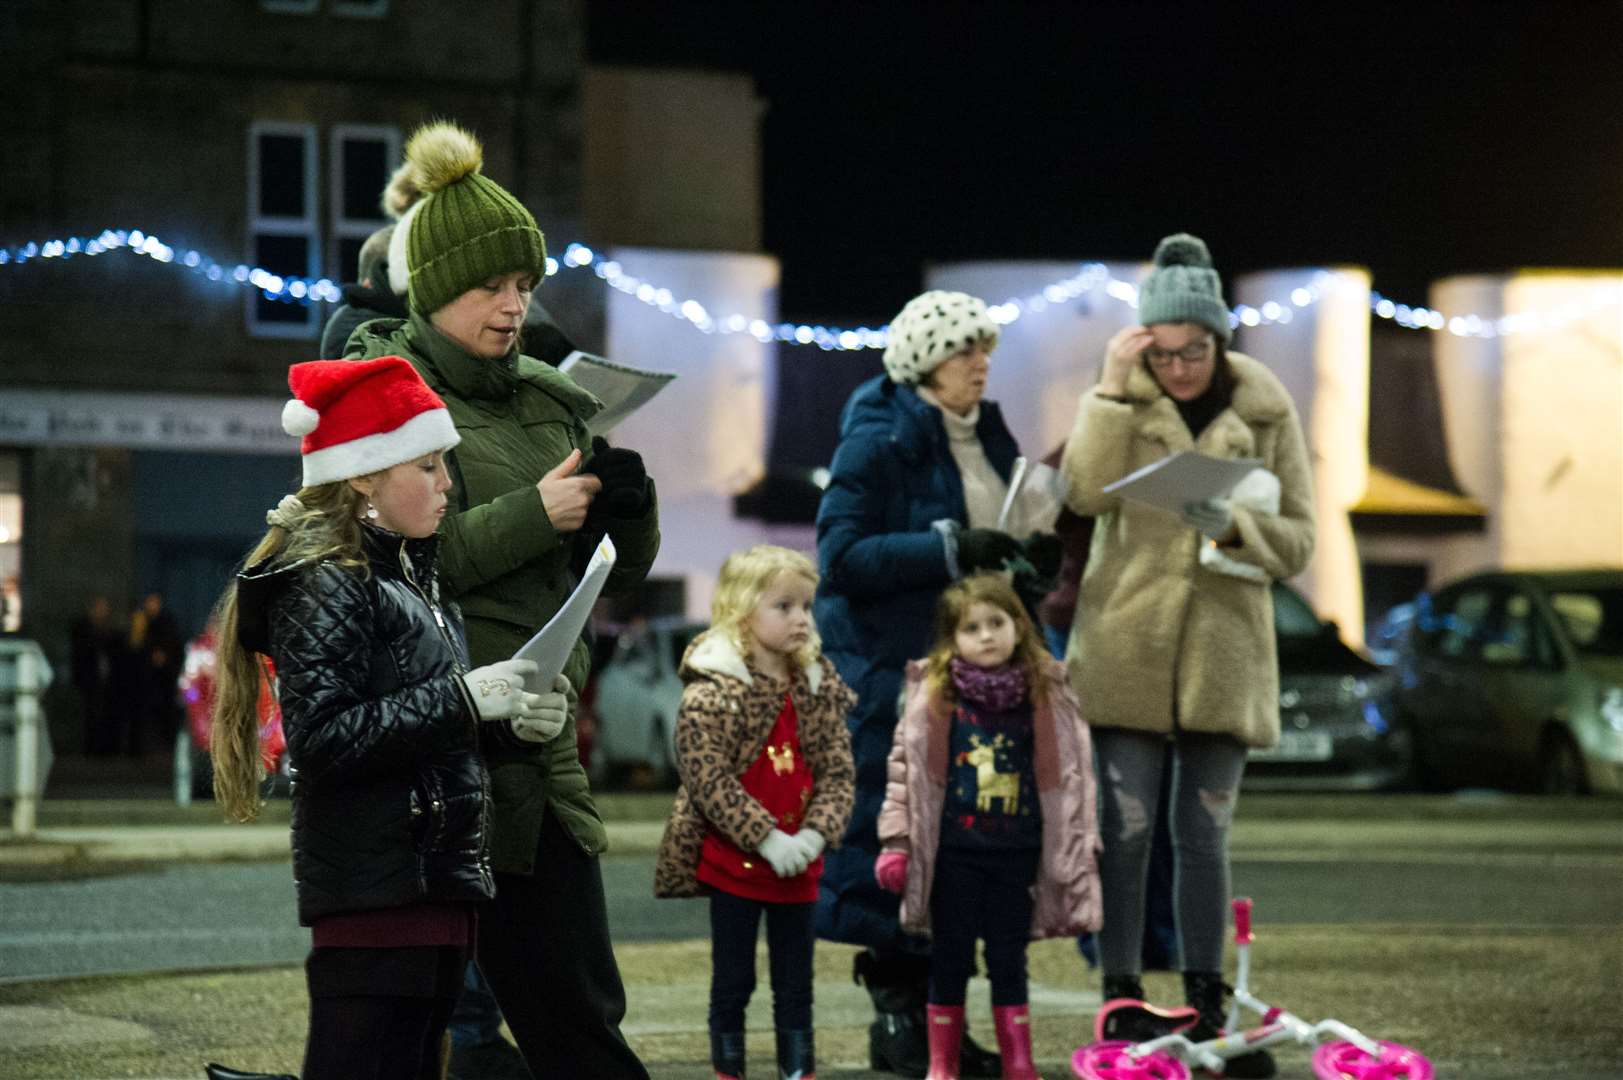 These families join in the festive tunes. Picture: Becky Saunderson